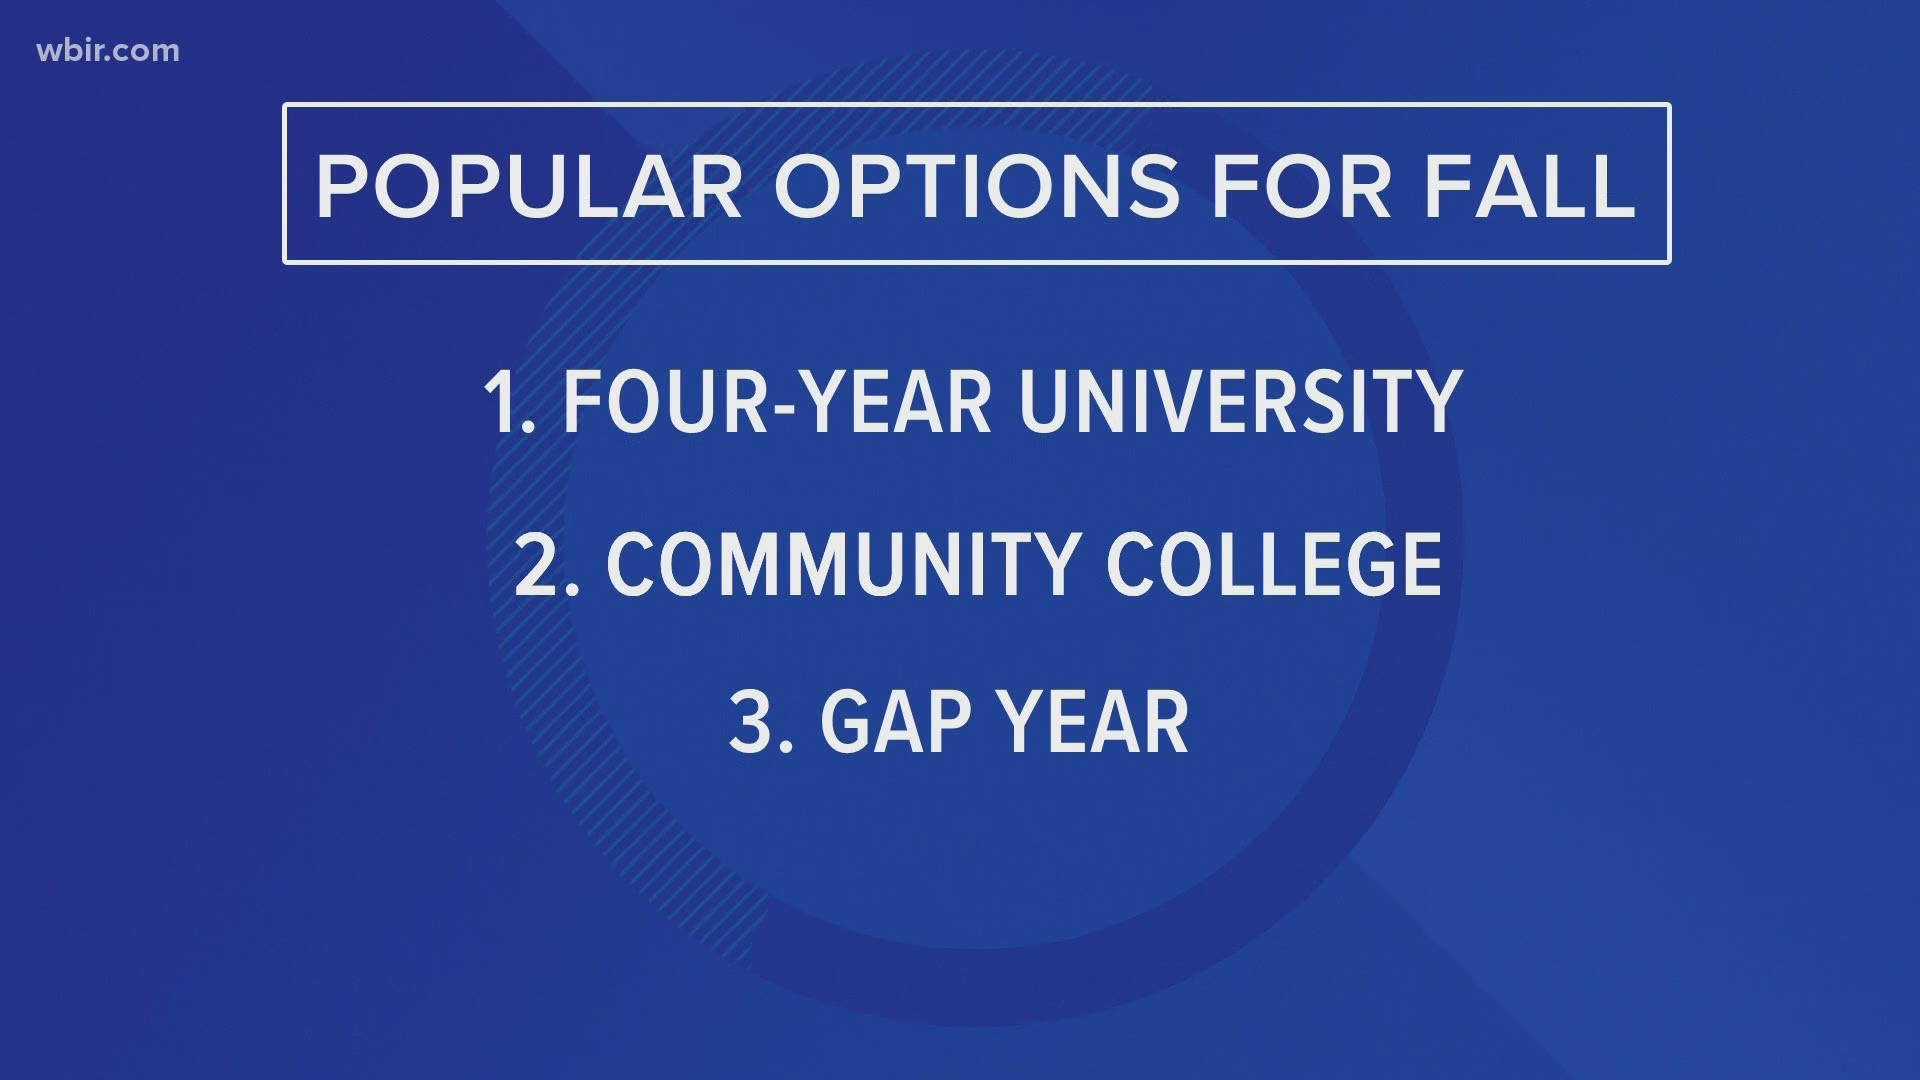 As the start of school creeps closer, college-aged students have a tough choice to make. Will they attend a 4-year university, community college, or take a year off?